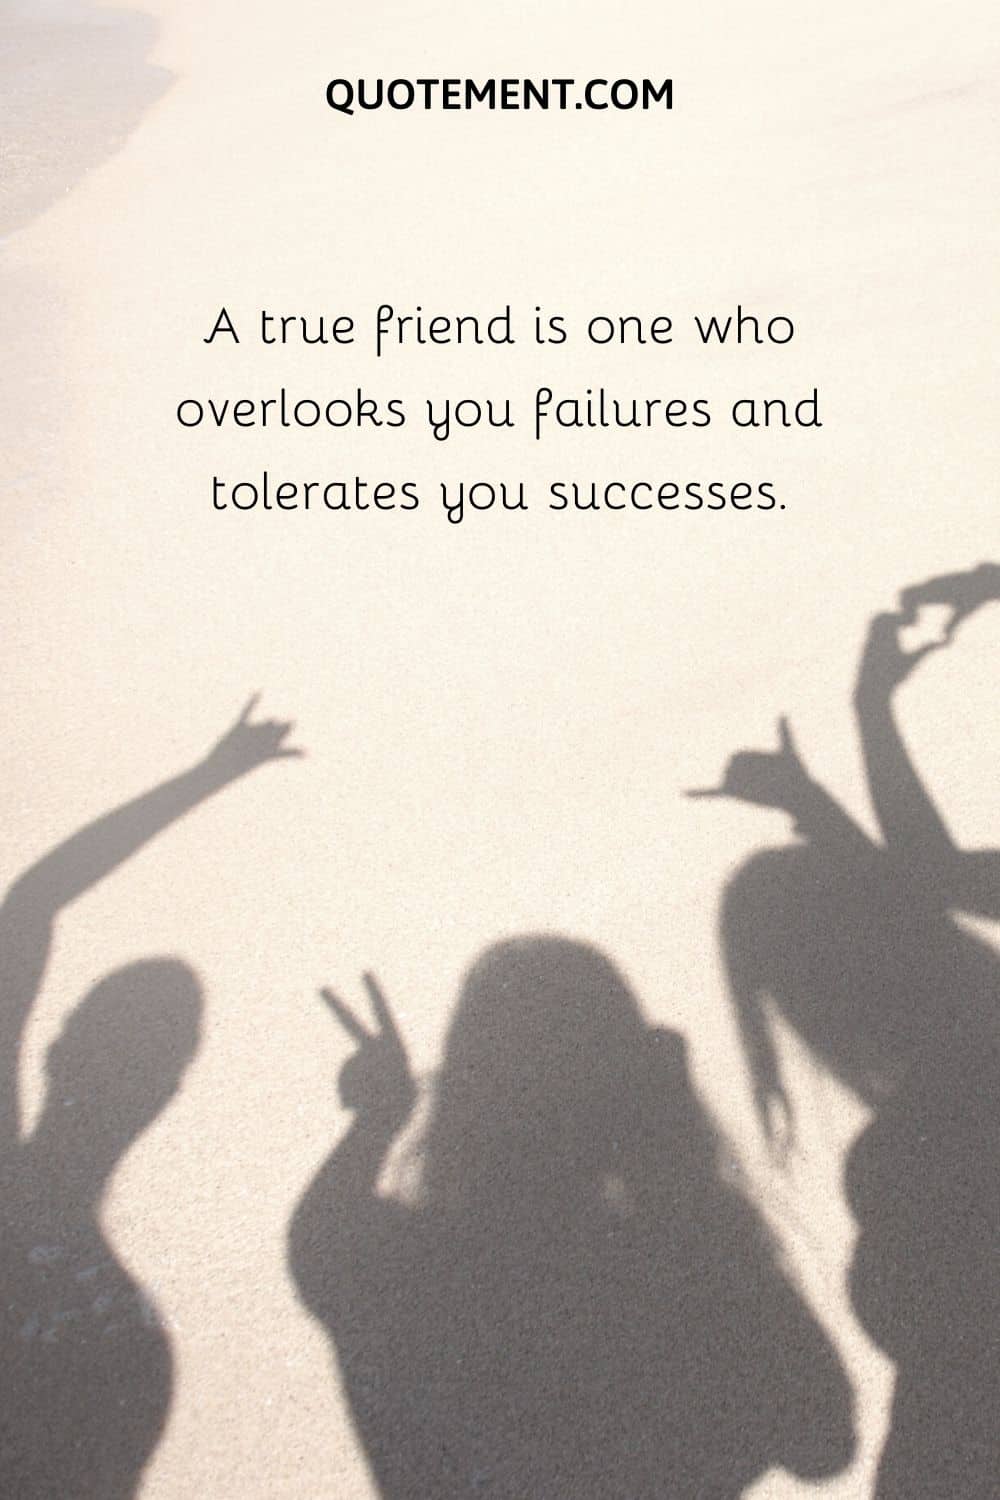 A true friend is one who overlooks you failures and tolerates you successes.